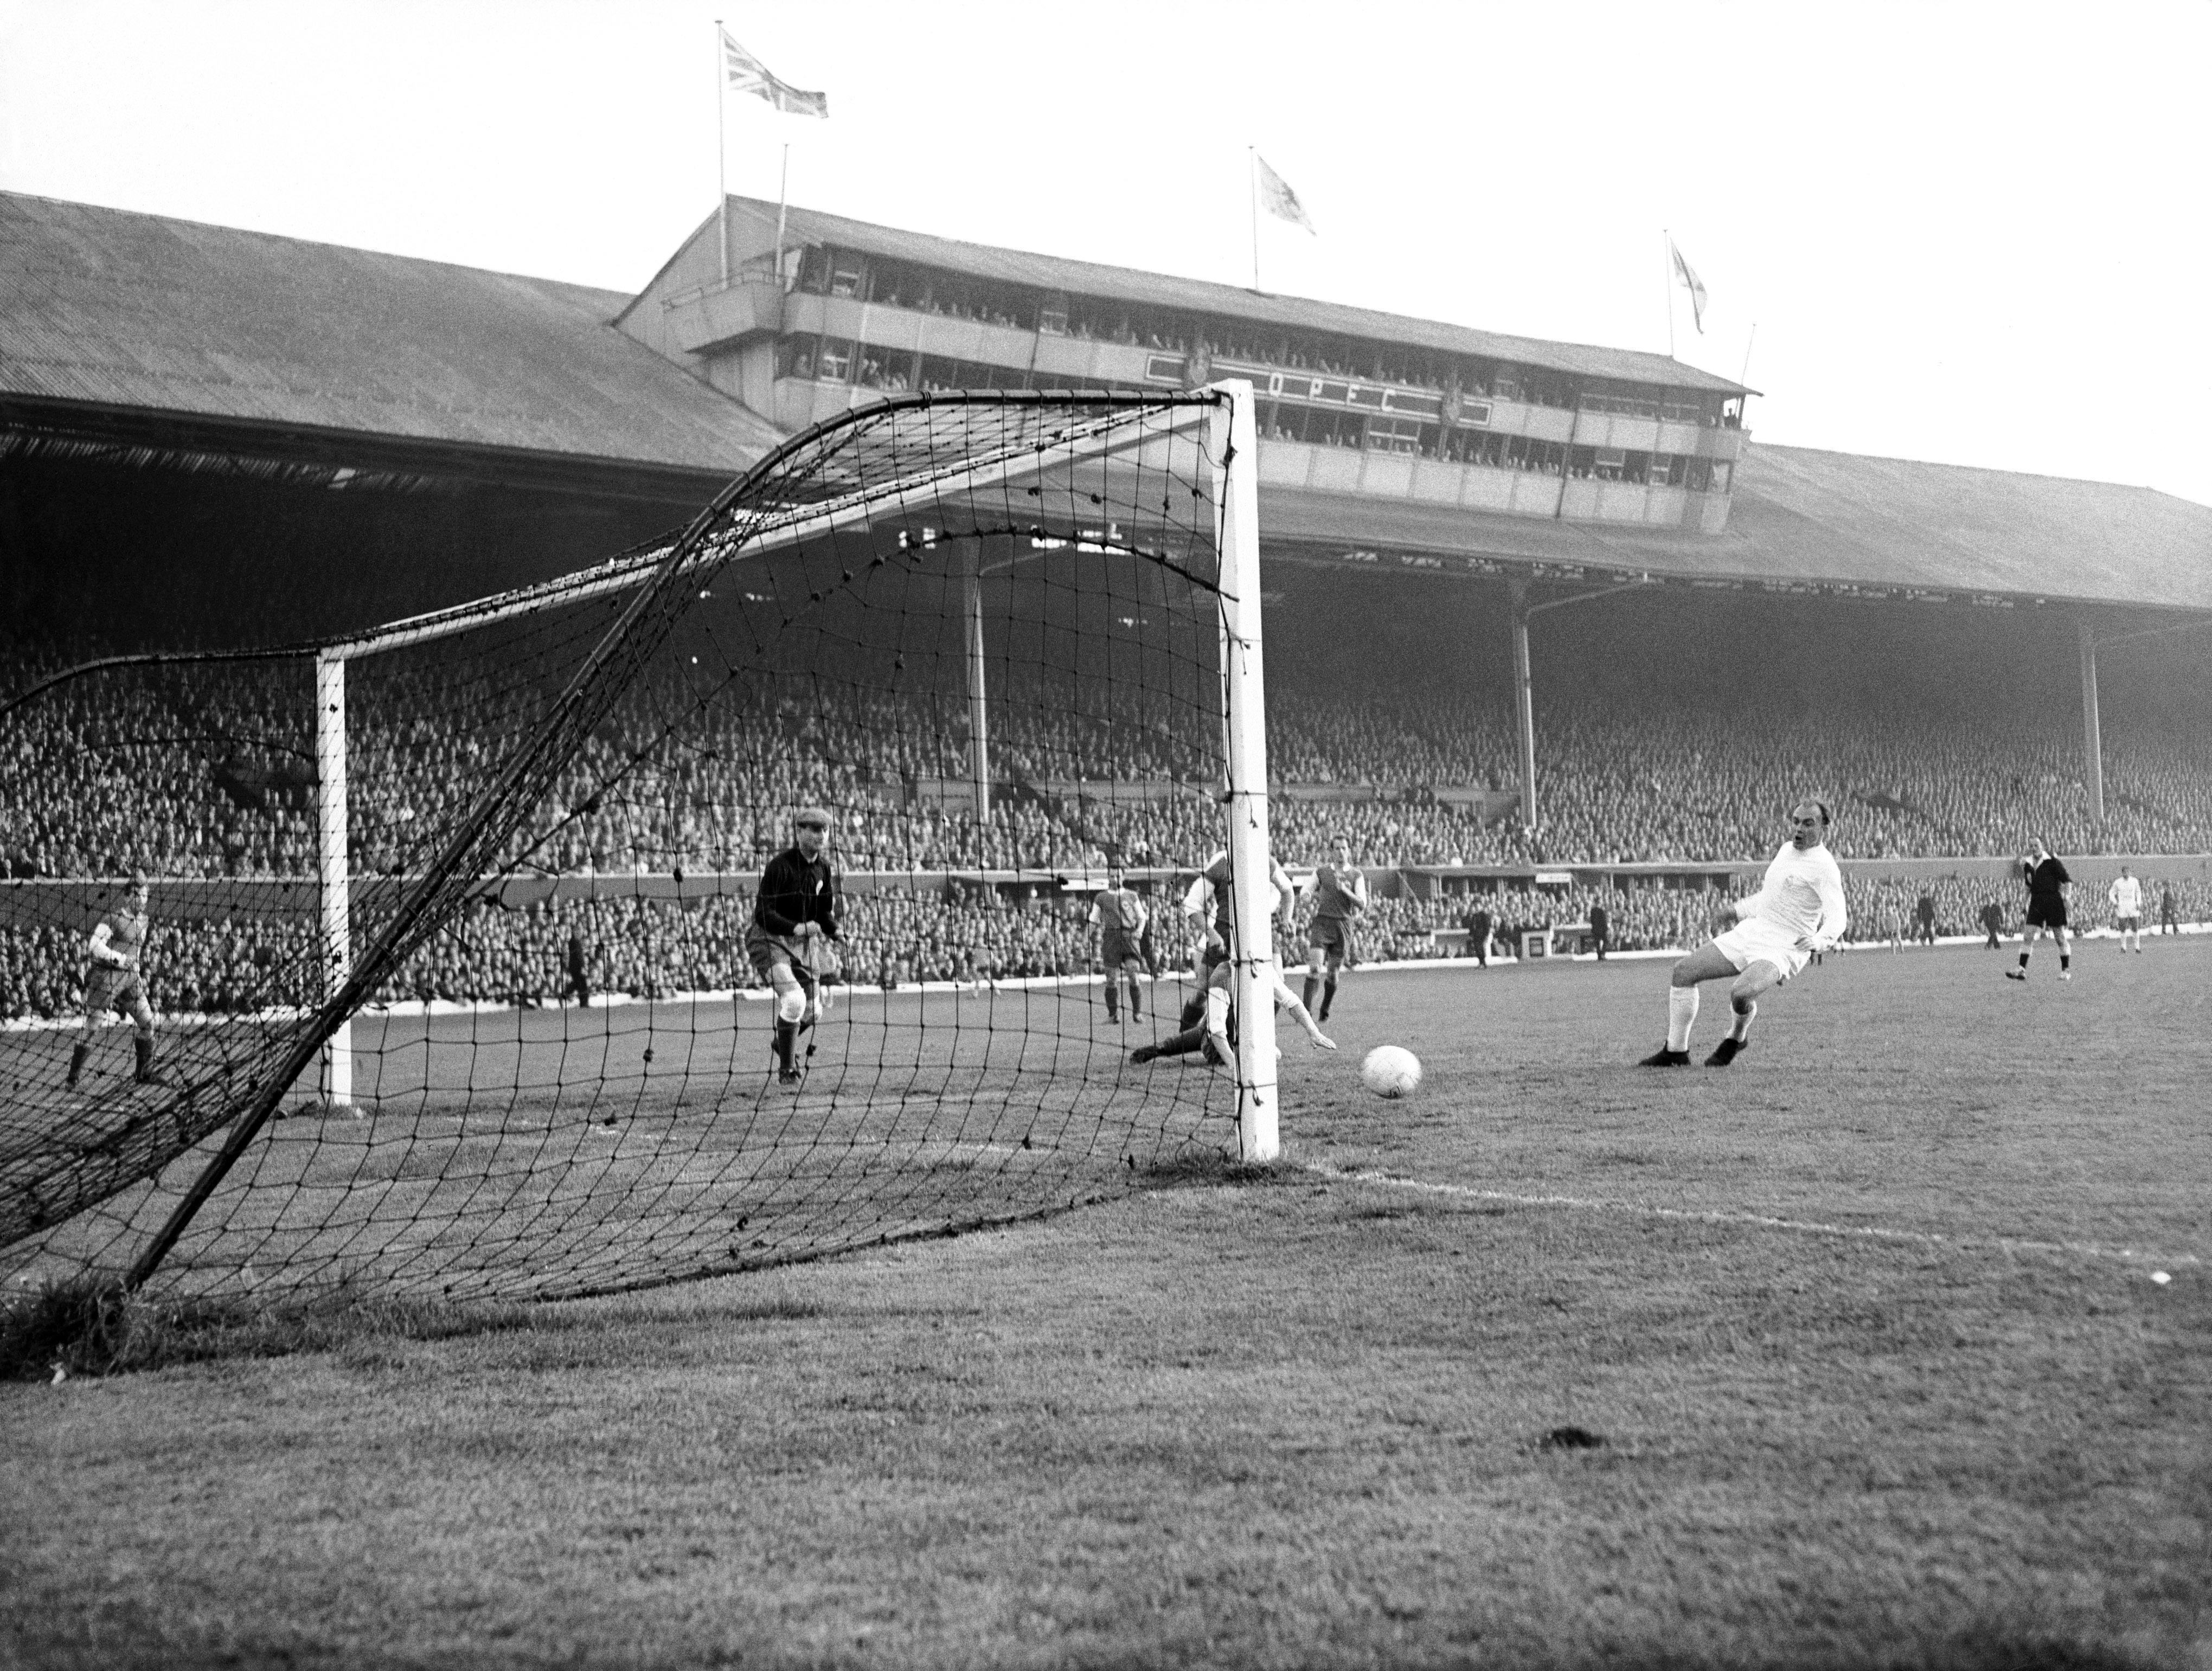 Soccer - European Cup - Final - Real Madrid v Eintracht Frankfurt. Real Madrid's Alfredo di Stefano (r) guides the ball into the corner of the net to give his team a 2-1 lead. Date: 18/05/1960